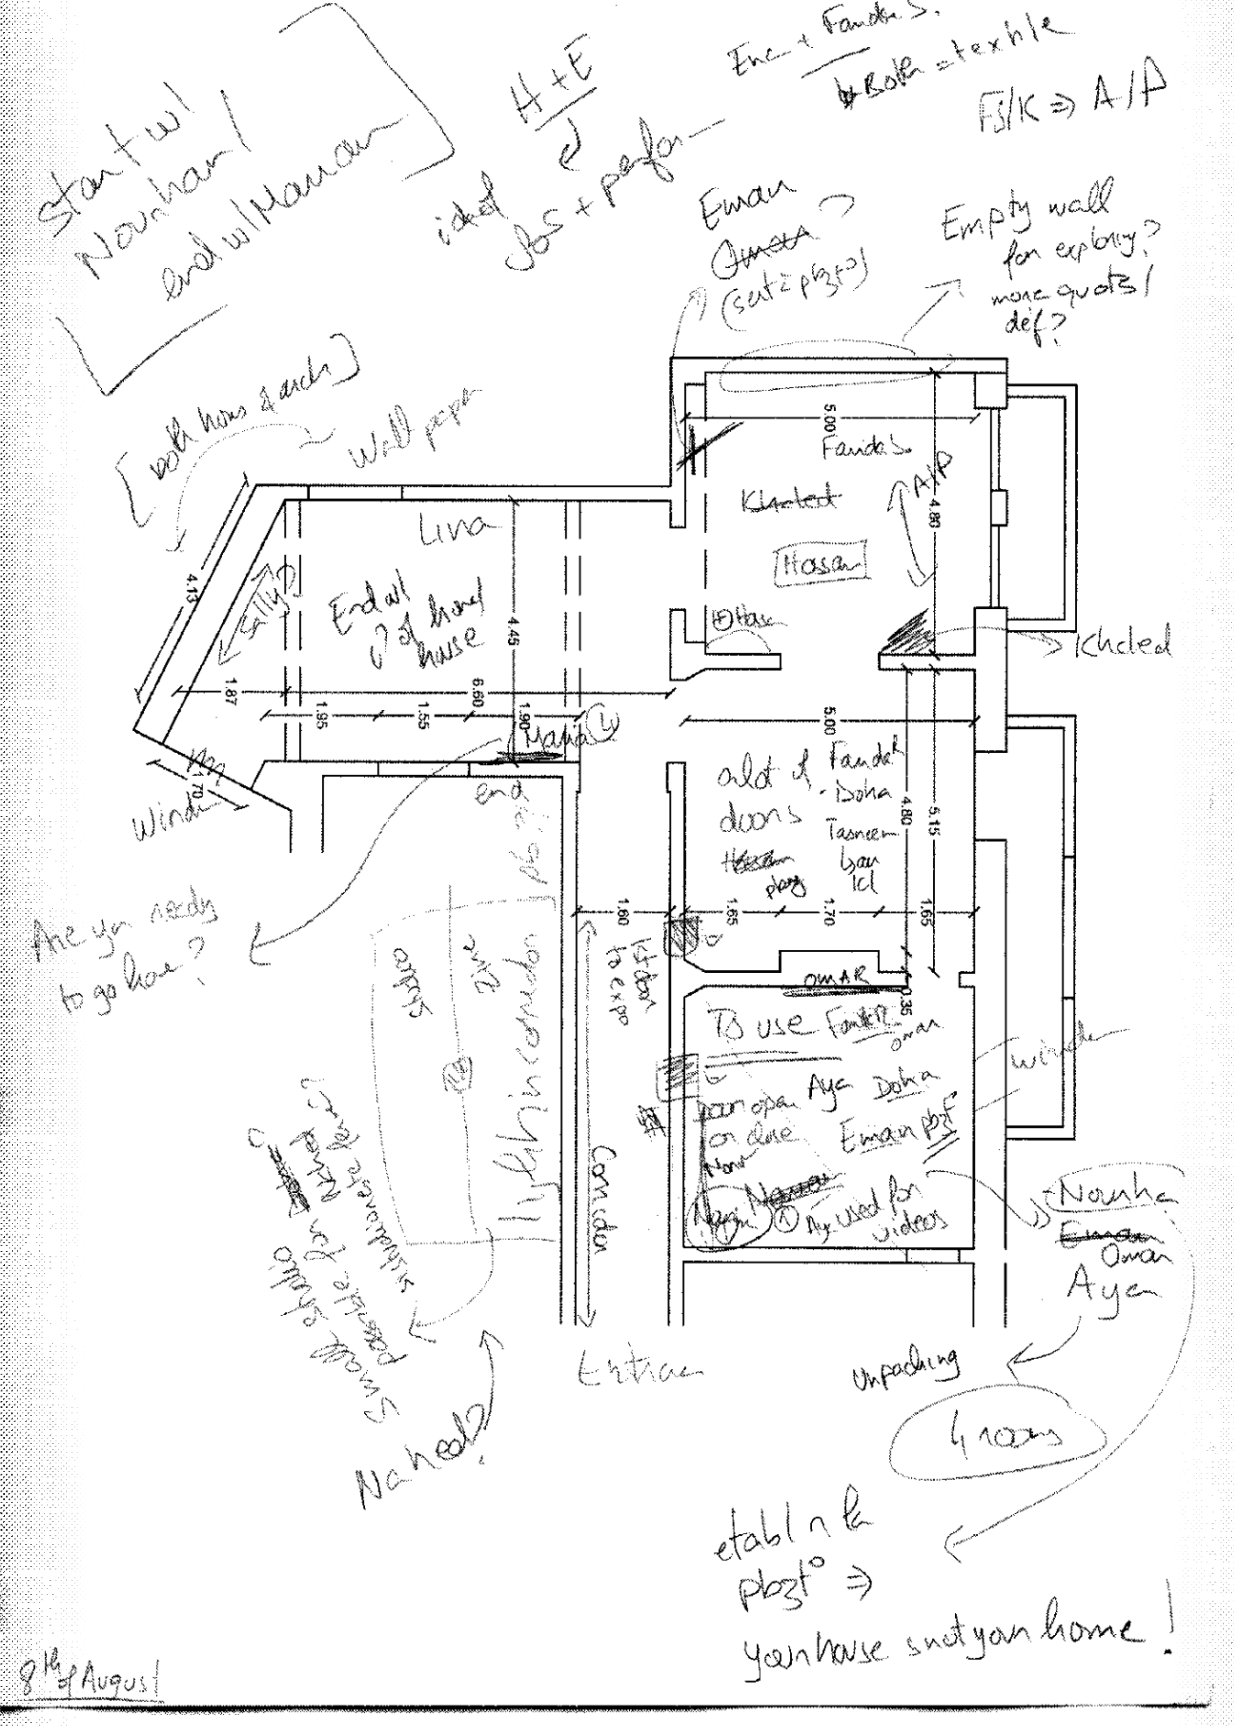 Figure 4: Farida Youssef’s notes, exhibition floor plan, dated August 8, 2022